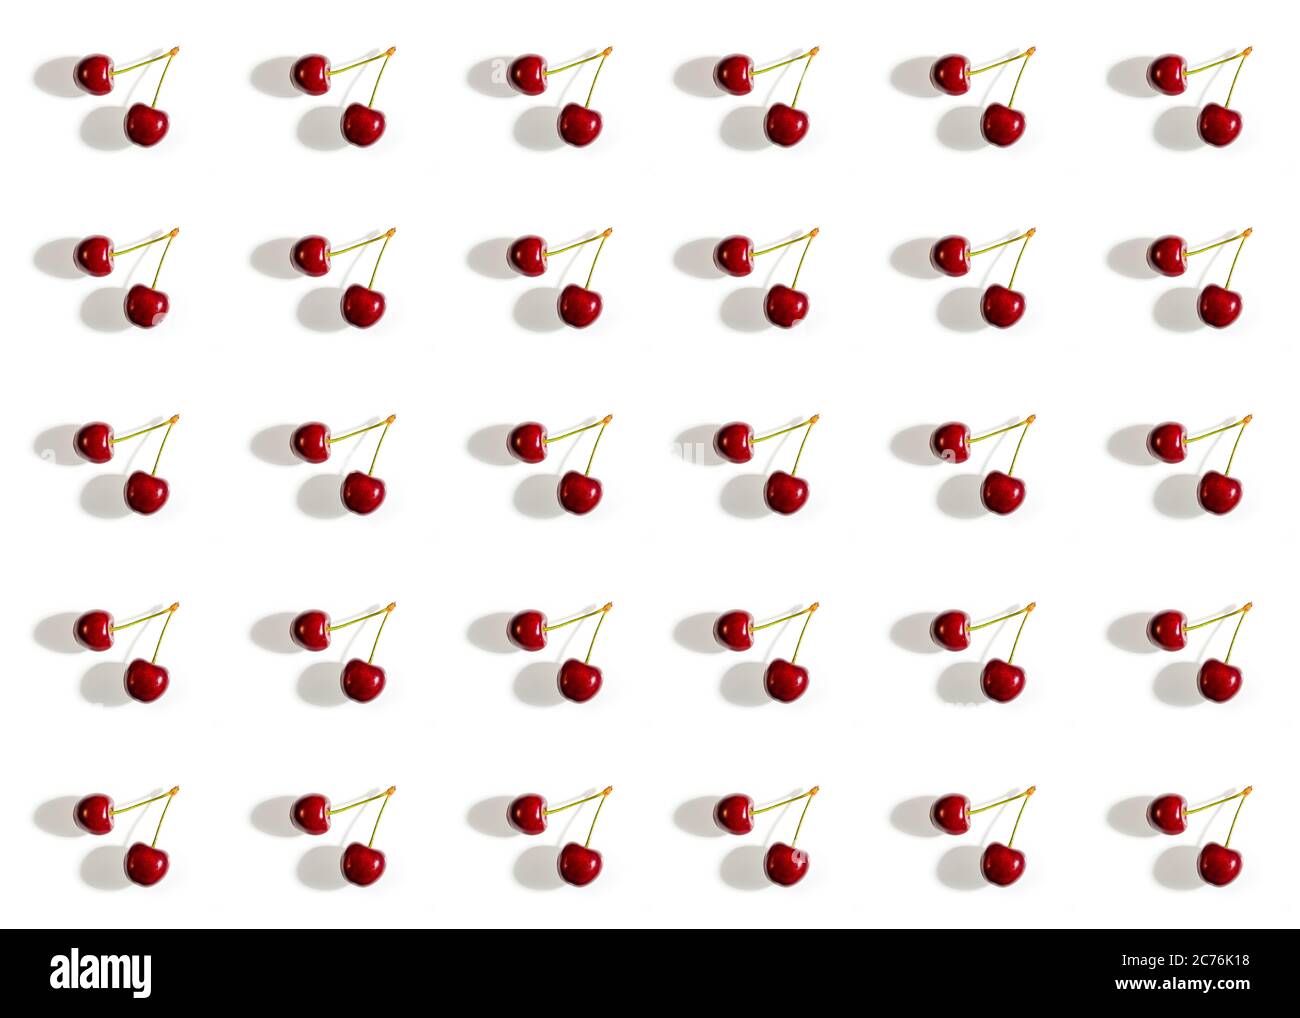 Sweet cherries pattern on a white background. Stock Photo